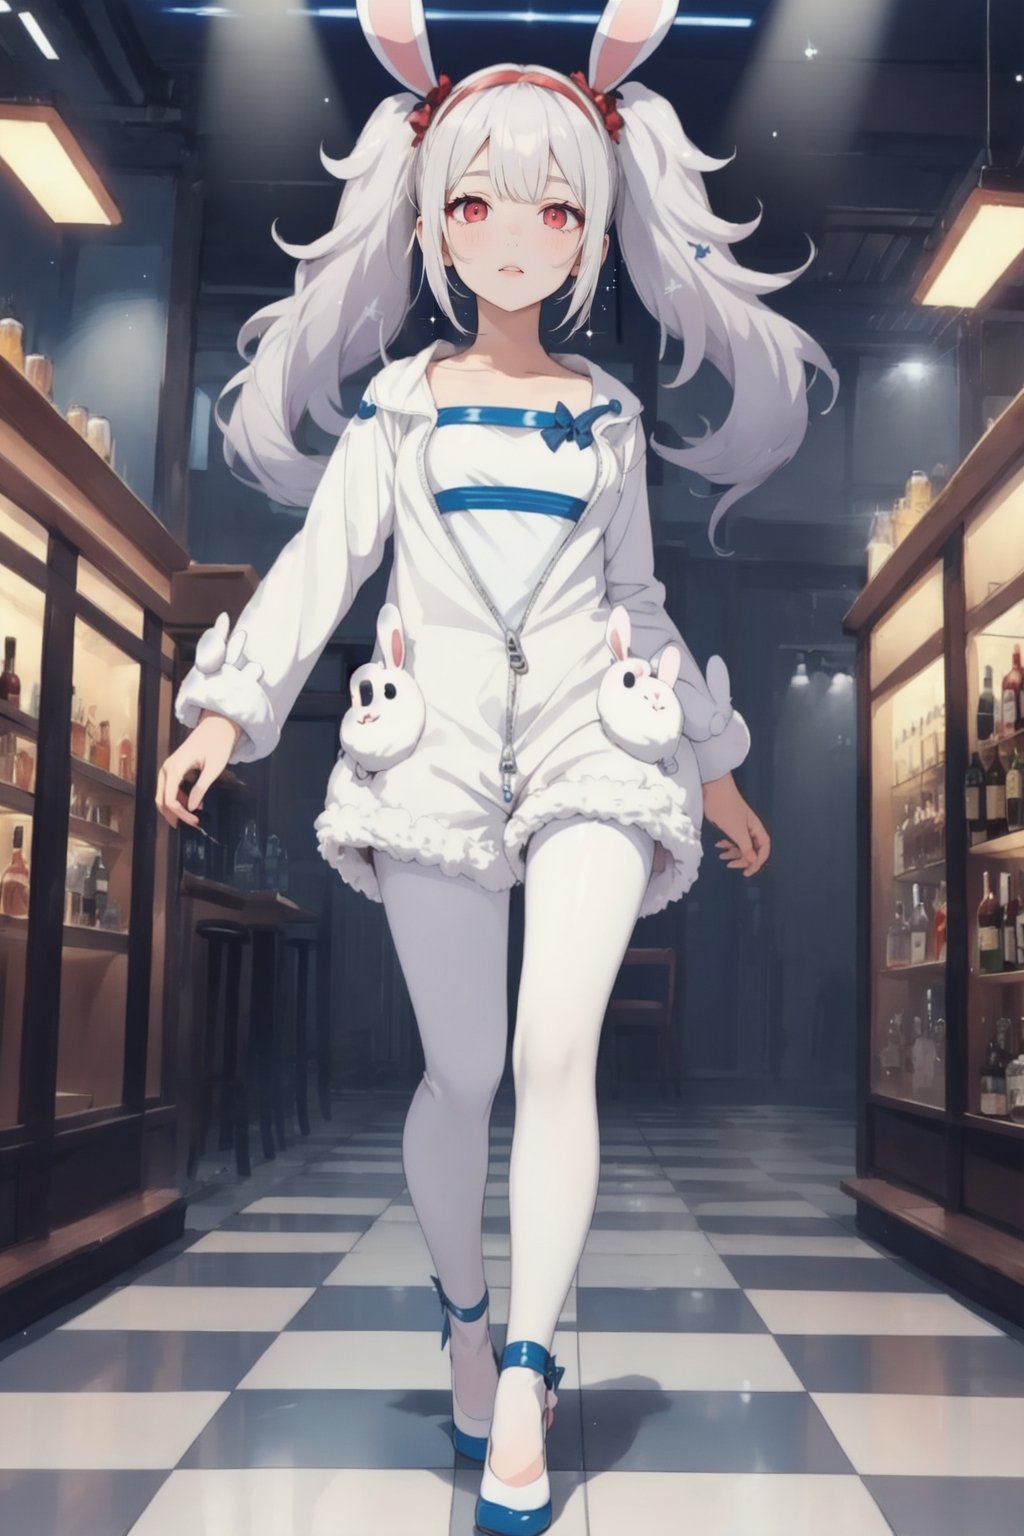 1 girl, solo, long hair, detailed eyes, bar background, blushing, smile, standing, blushing, clear eyes, bright eyes, detailed eyes, perfect light,hime style, aalaffey, high heels, disco flooring, spoltlight,animal ears, bunny outfit, blue bunnysuit, pig tails, small breasts, perfect anatomy, bar, wavy pigtails, fluffy hair, perfect hands, onesie